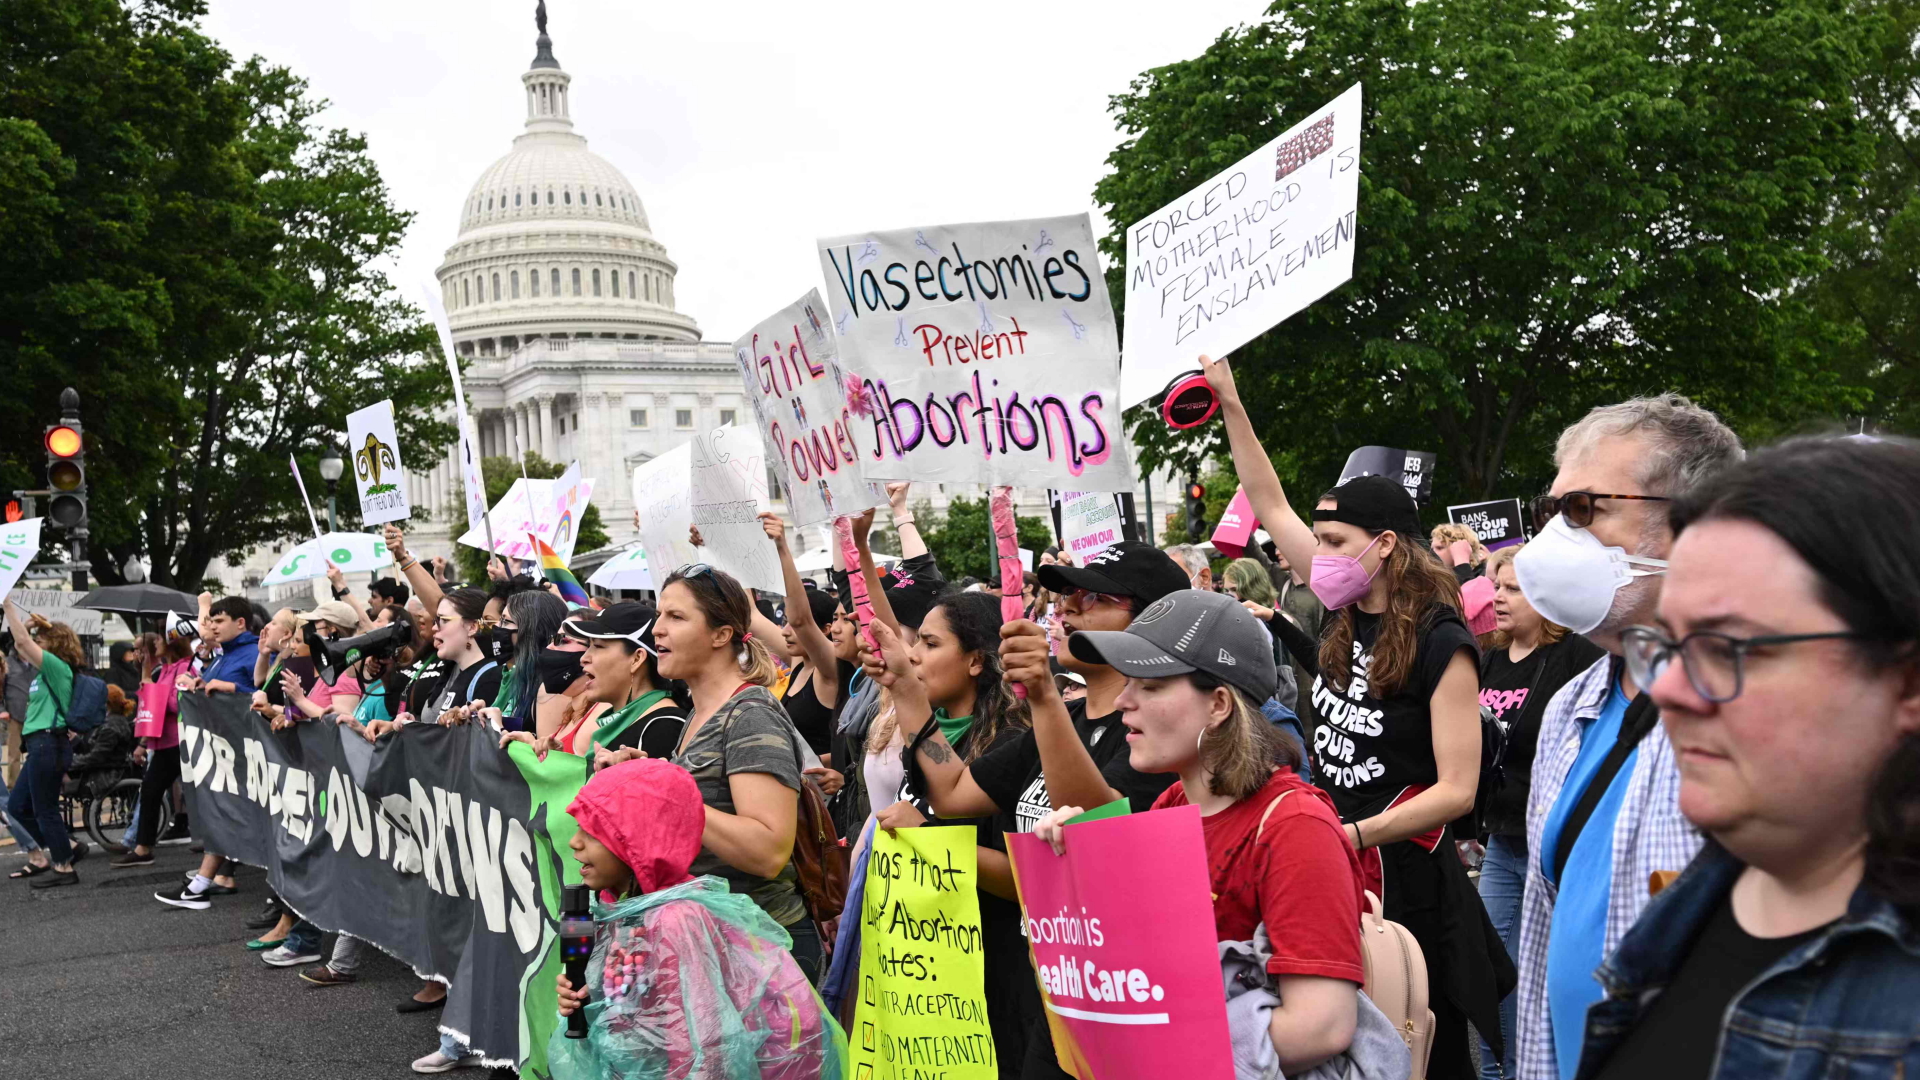 USA: Thousands protest against abortion rights